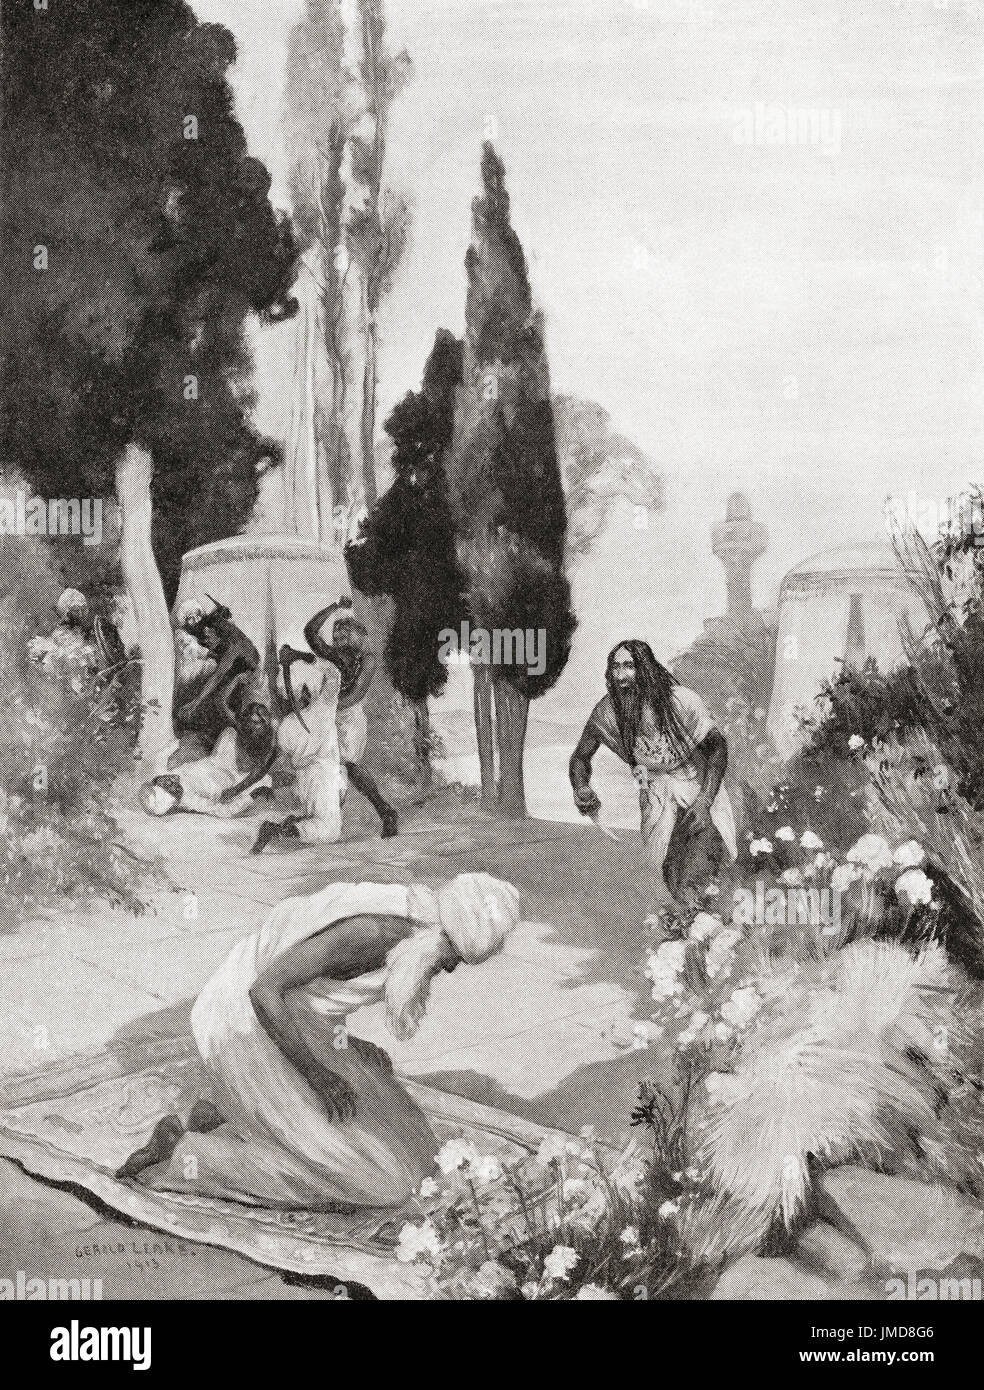 The assassination of Muhammad Ghori whilst at evening prayer, 1206.   Mu'izz ad-Din Muhammad Ghori, born Shihab ad-Din, 1149 – 1206, aka  Muhammad of Ghor.  Sultan of the Ghurid Empire.   From Hutchinson's History of the Nations, published 1915. Stock Photo